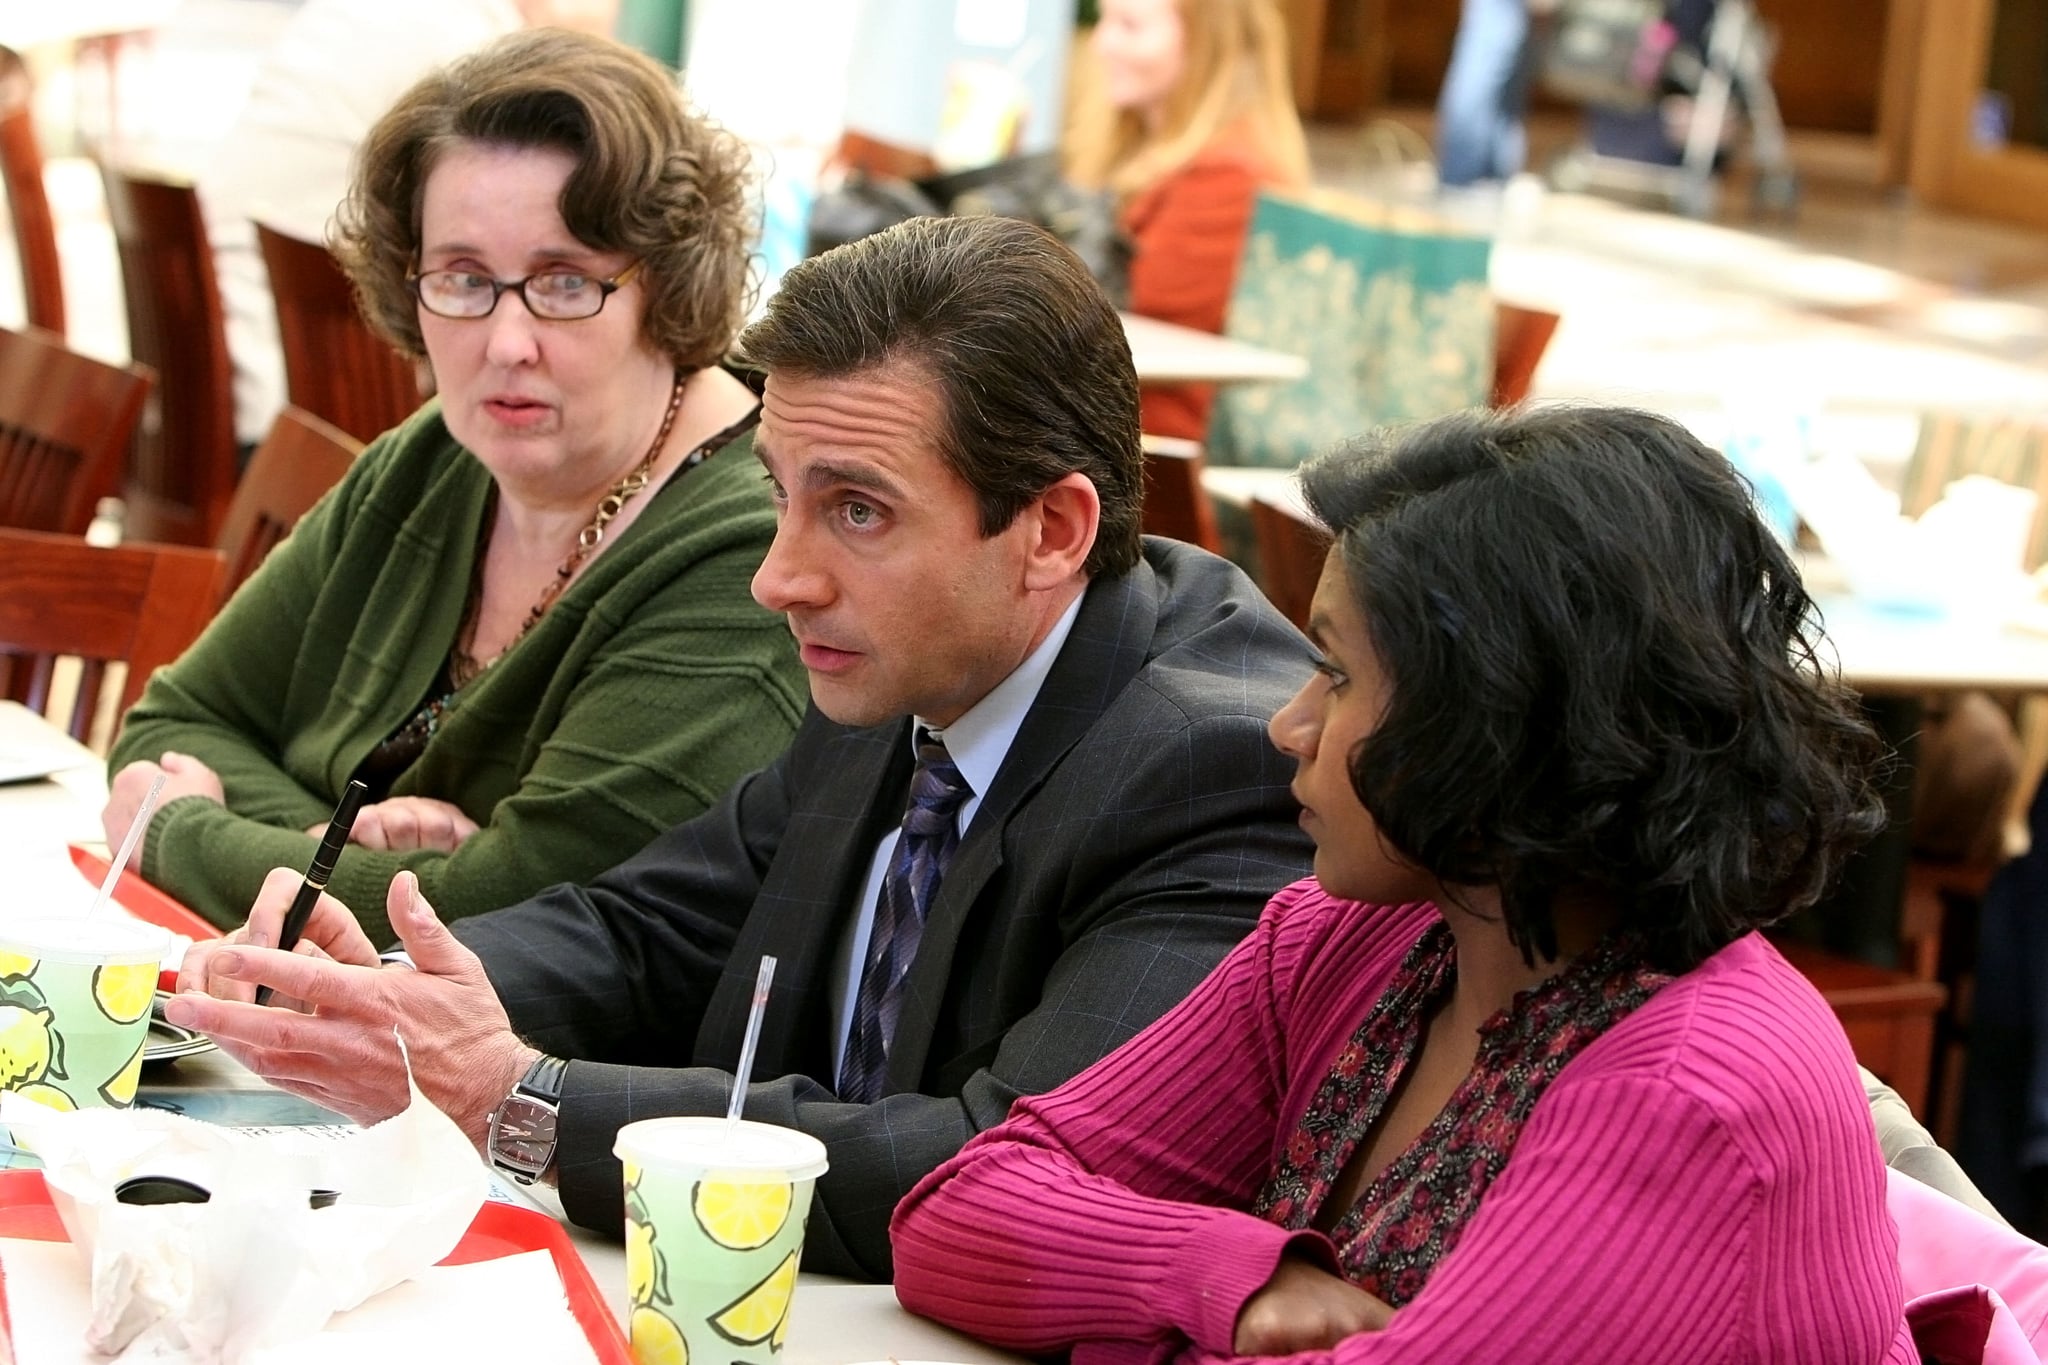 Phyllis Smith, Steve Carell, and Mindy Kaling on the set of NBC's The Office.